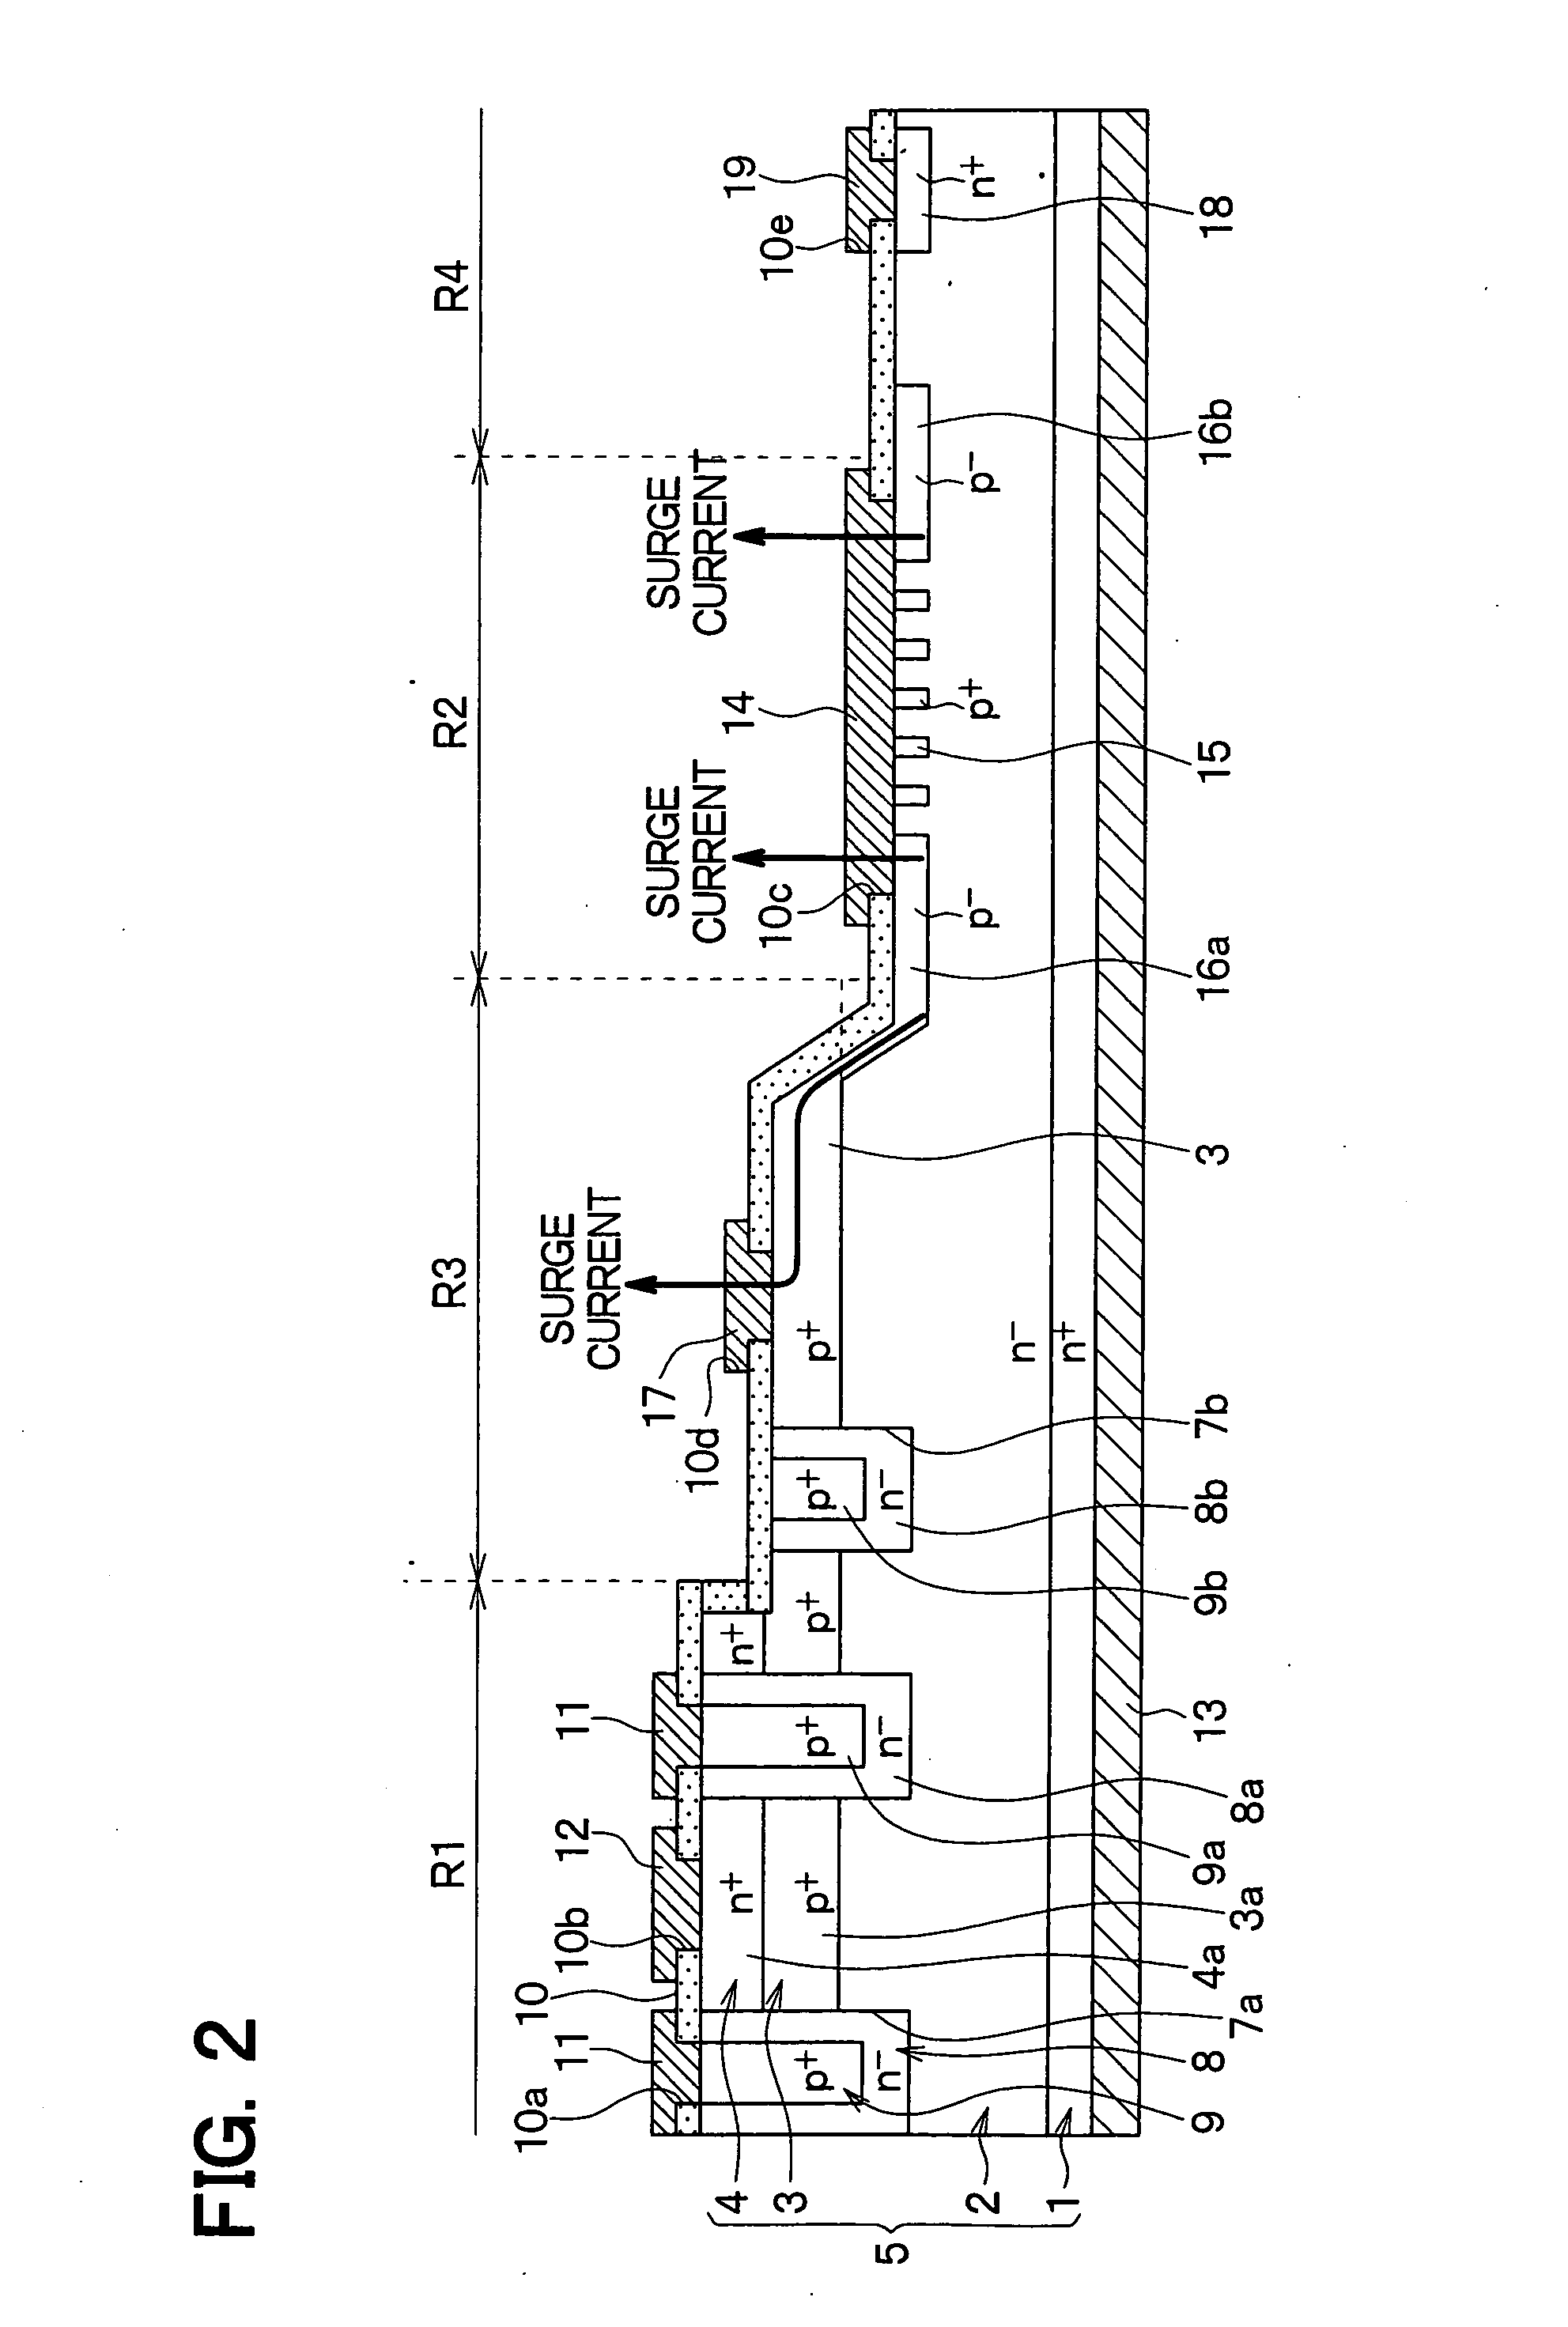 Wide band gap semiconductor device including junction field effect transistor